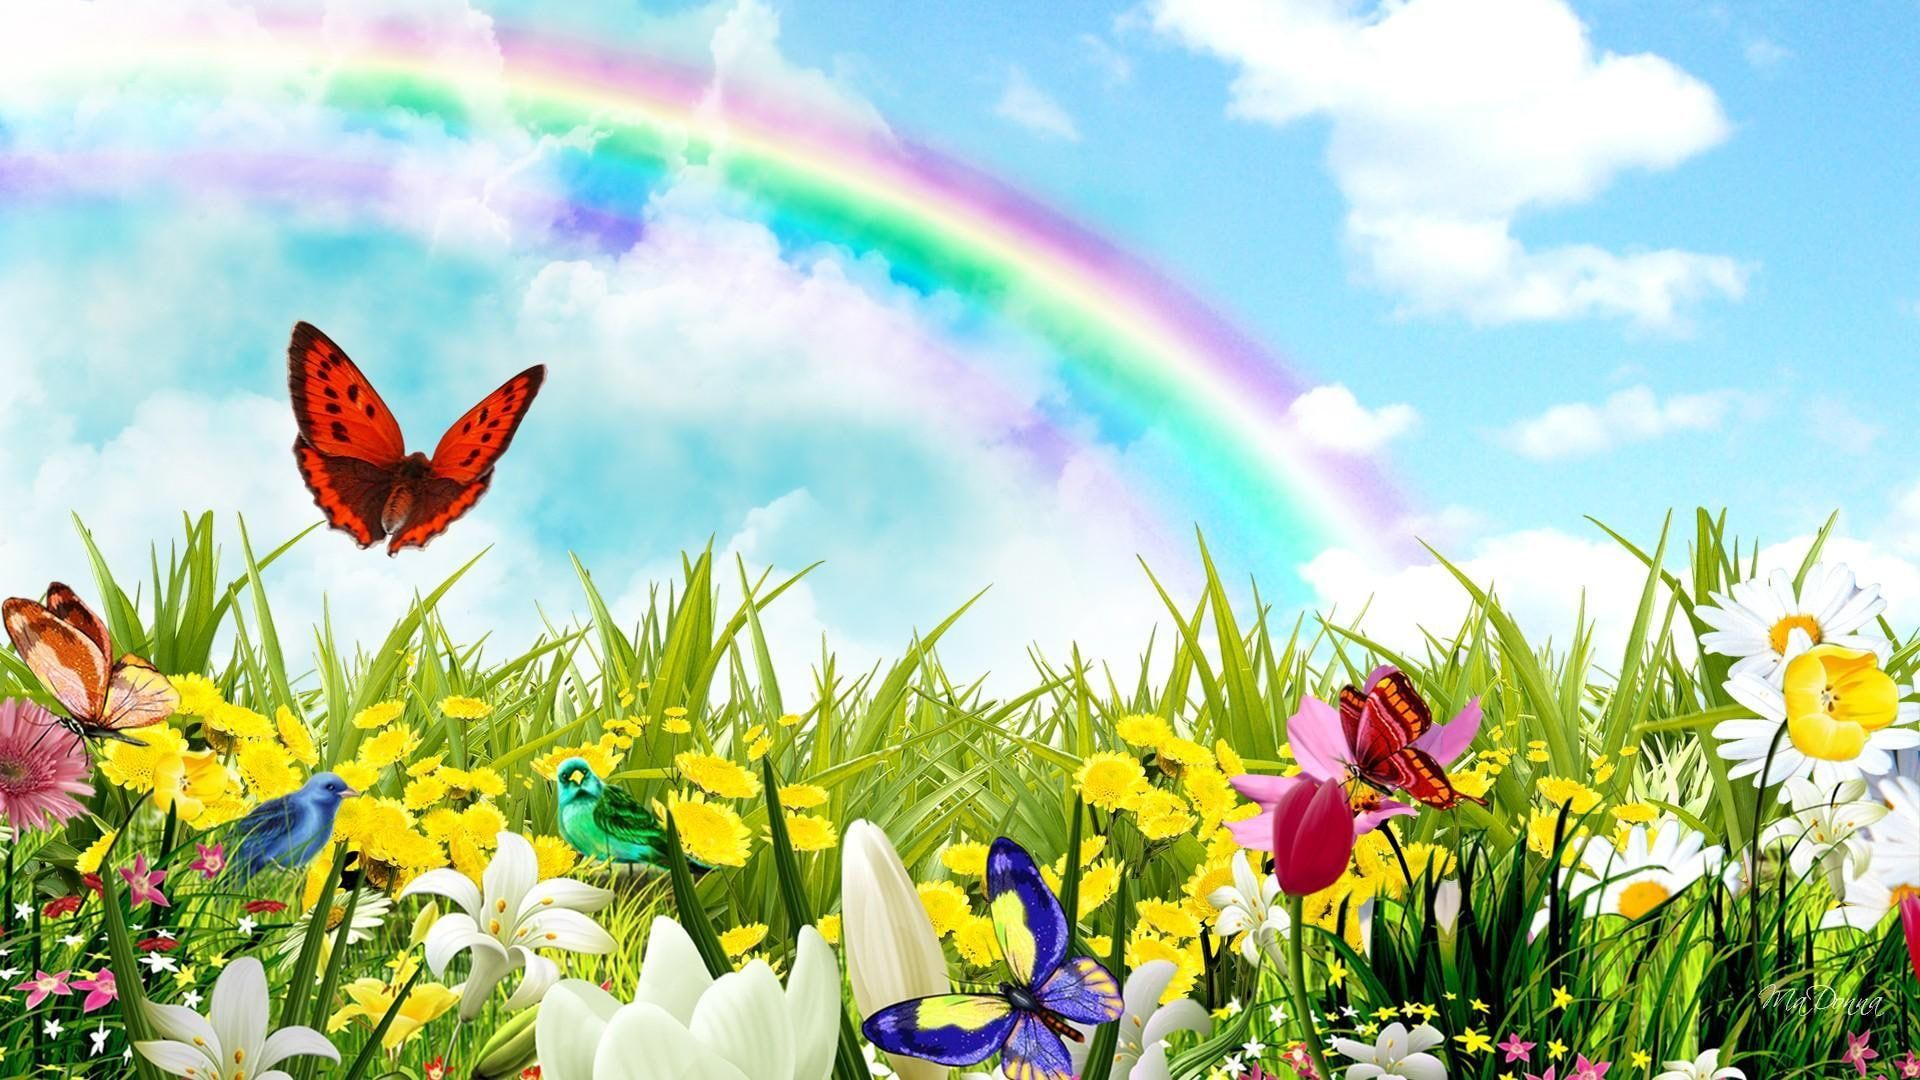 Rainbow Surprises #rainbow #flowers #spring #birds #field #butterflies #summer #clouds nature an. Facebook cover image wallpaper, Happy spring day, Happy spring